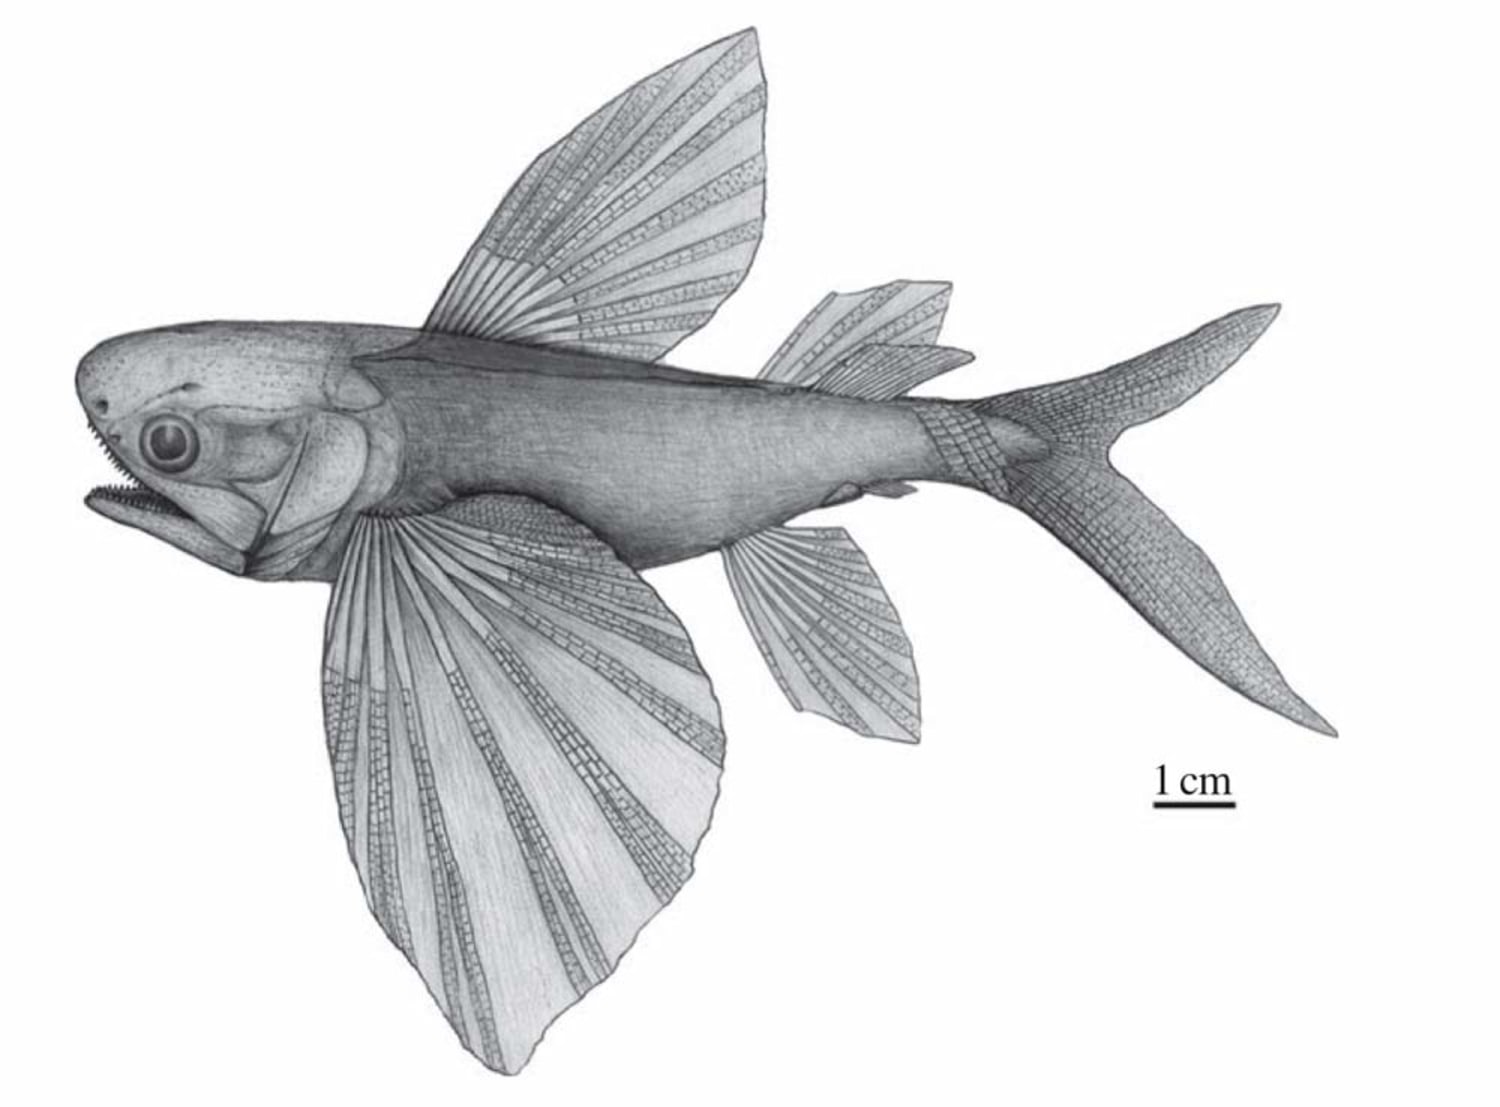 Flying fish evolved to escape their prehistoric predators